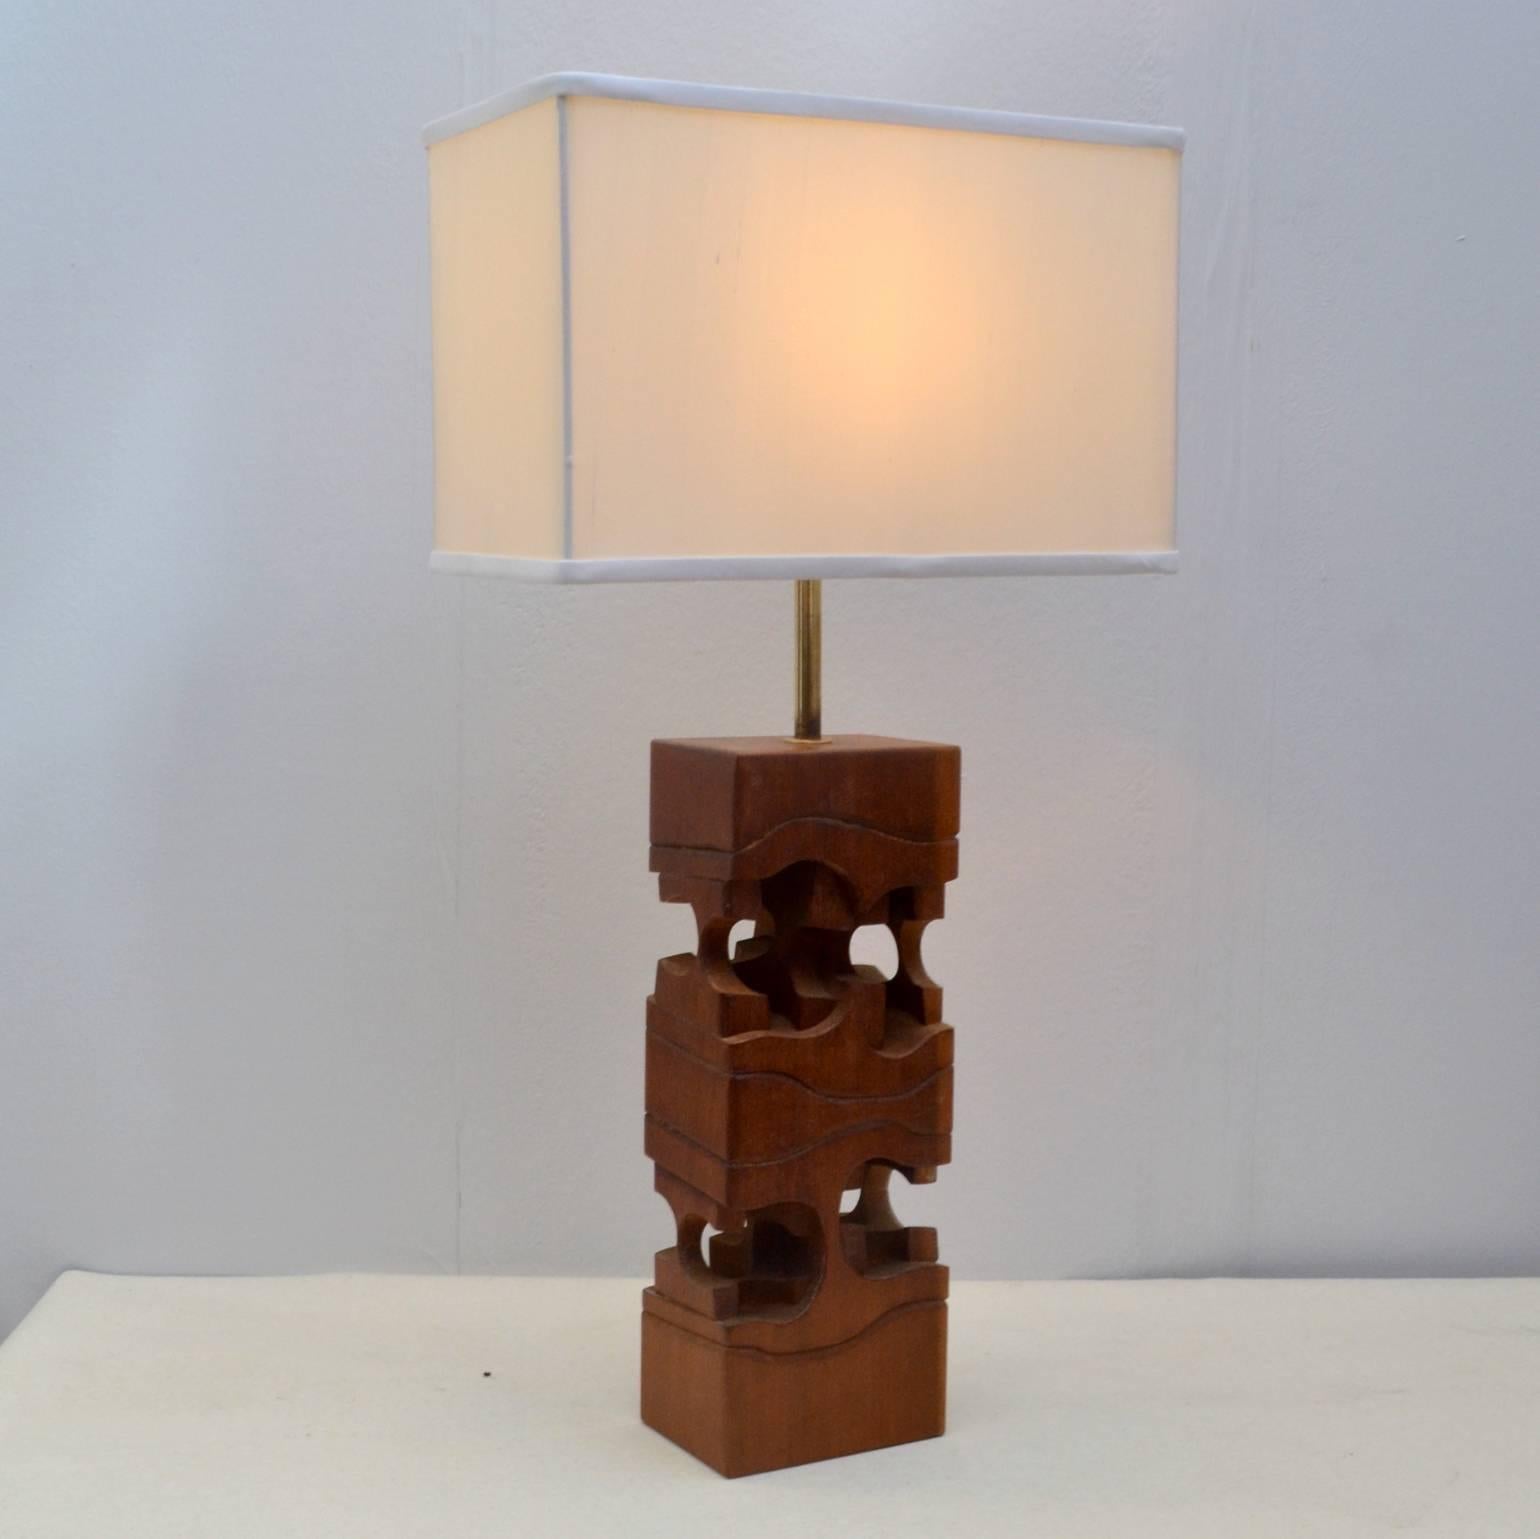 Sculptural hand carved in lamps teakwood. The new shades are silk double lined.
Brian Willsher began working with wood in 1956, applying his experimental forms to lamp bases. Shortly afterwards Christopher Heal, of department store Heal’s, asked